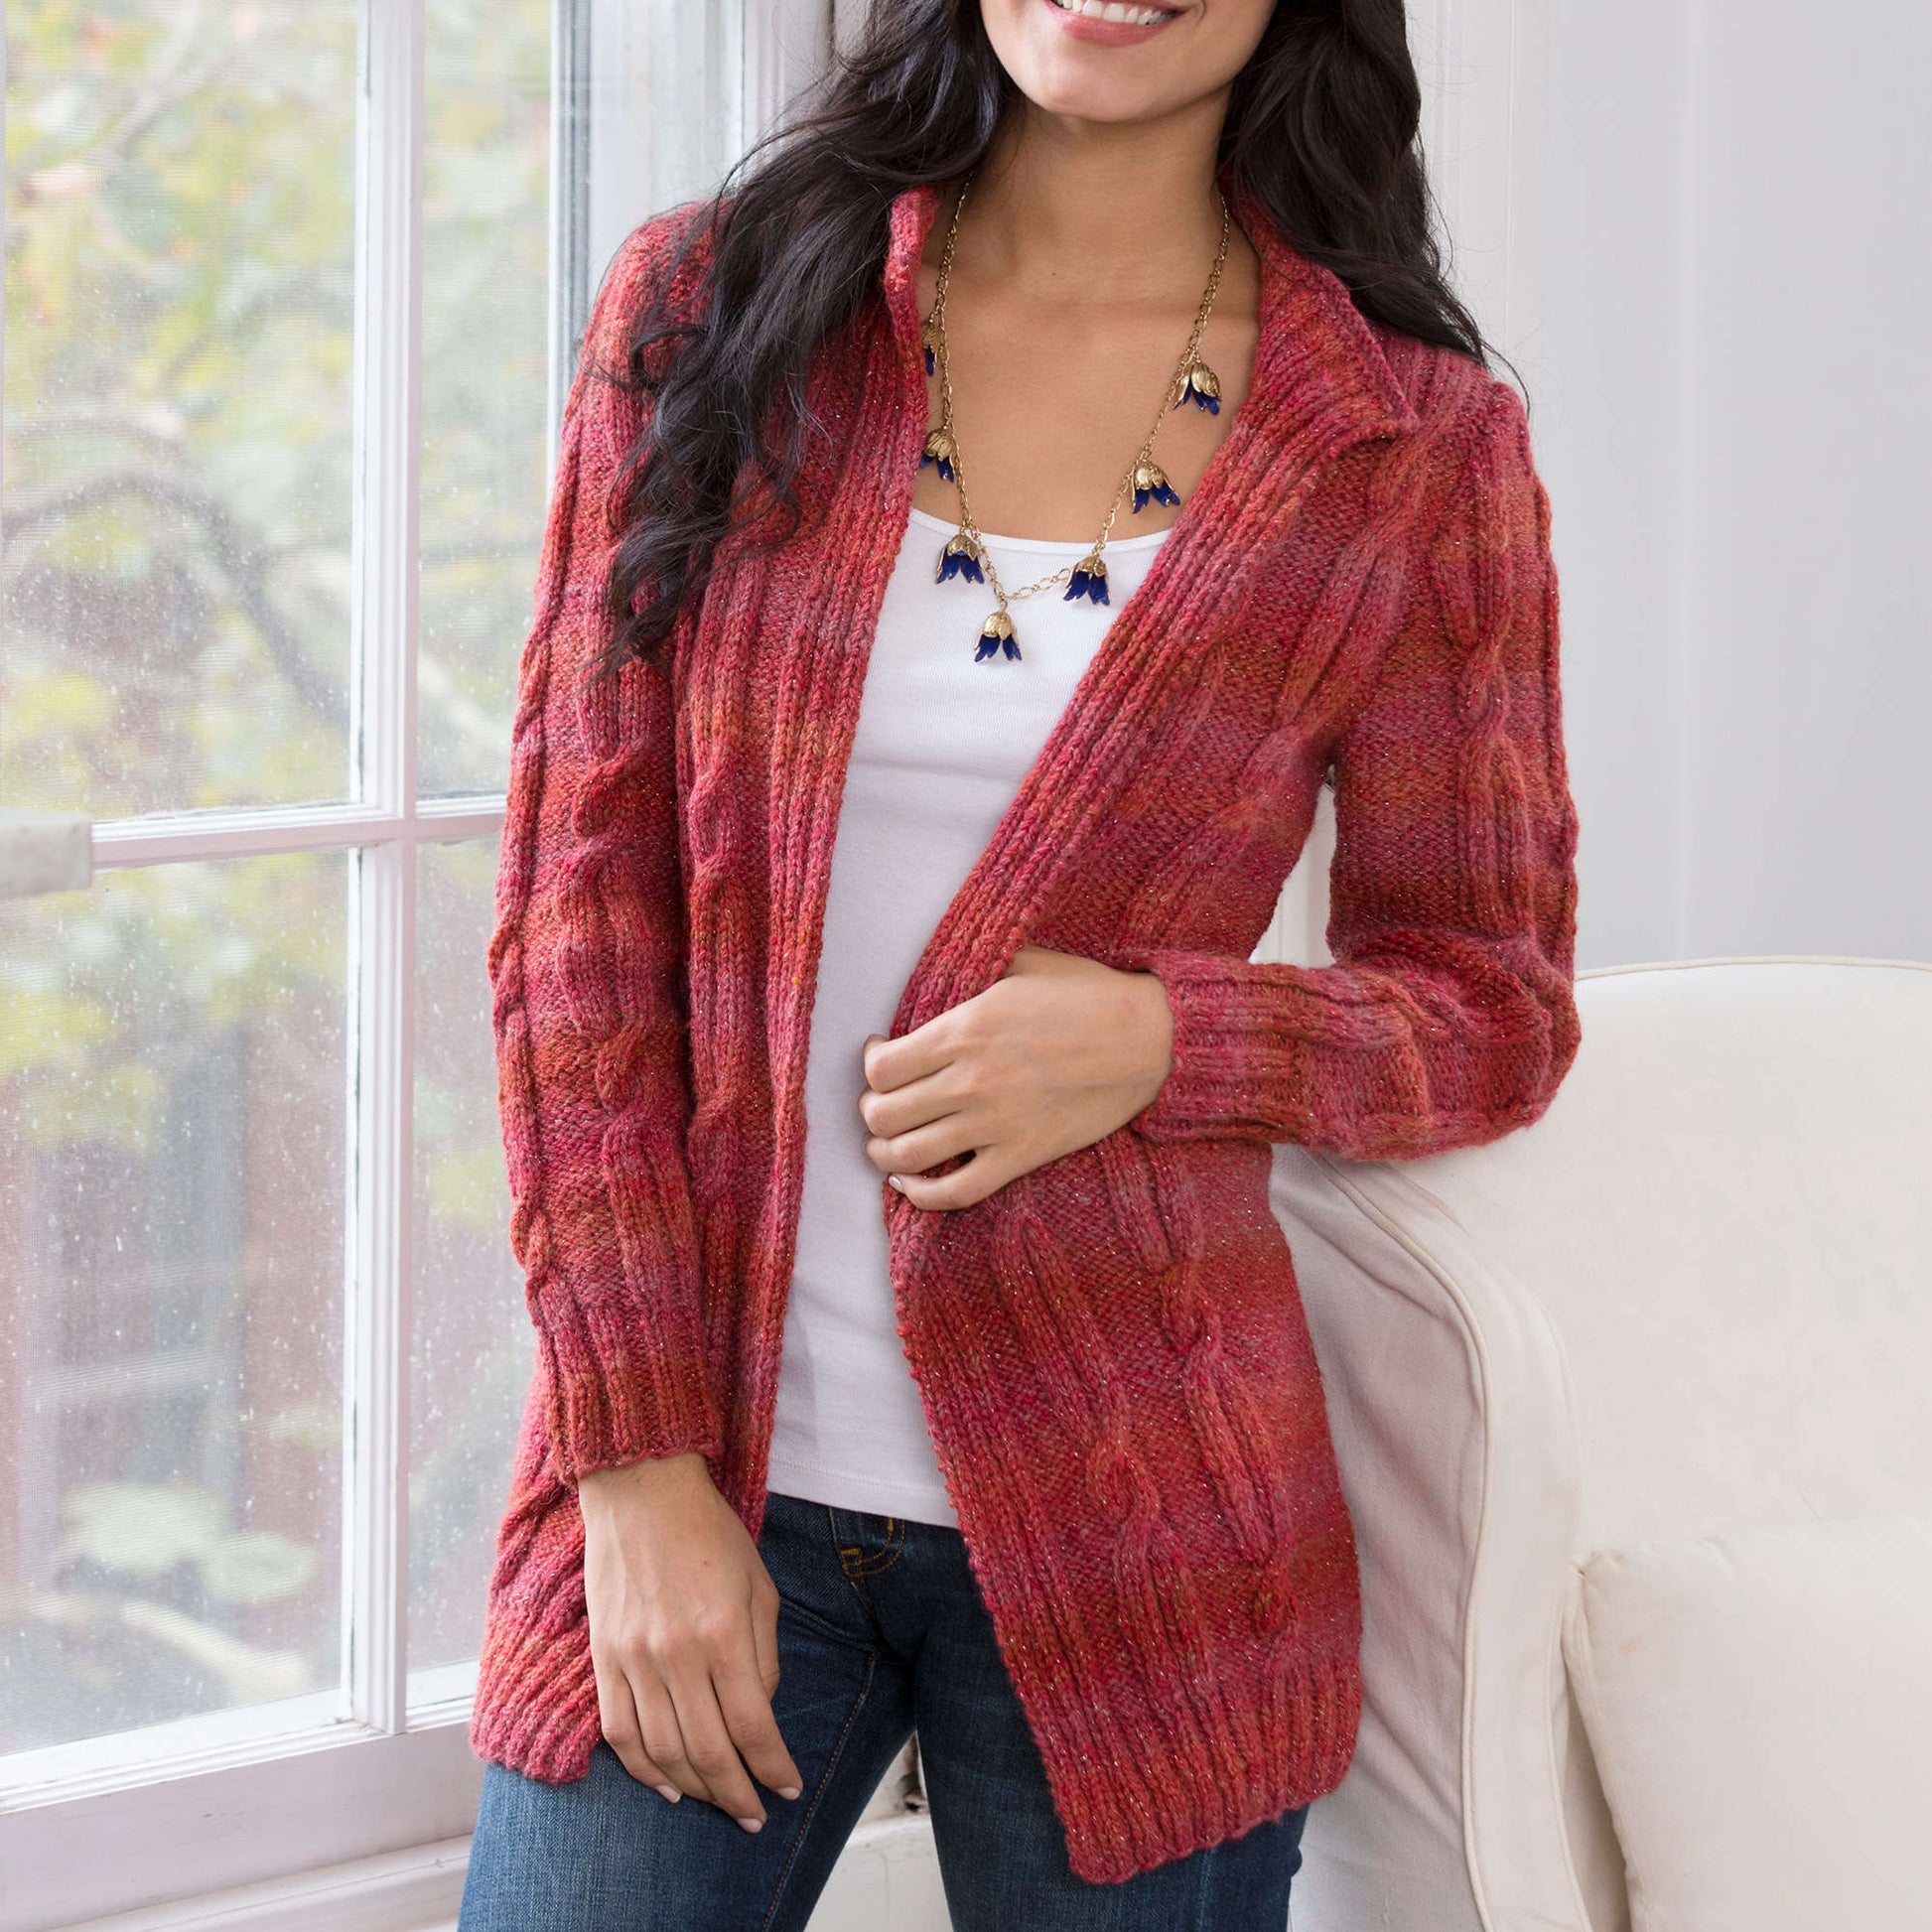 Free Red Heart Cabled Coatigan Knit Pattern